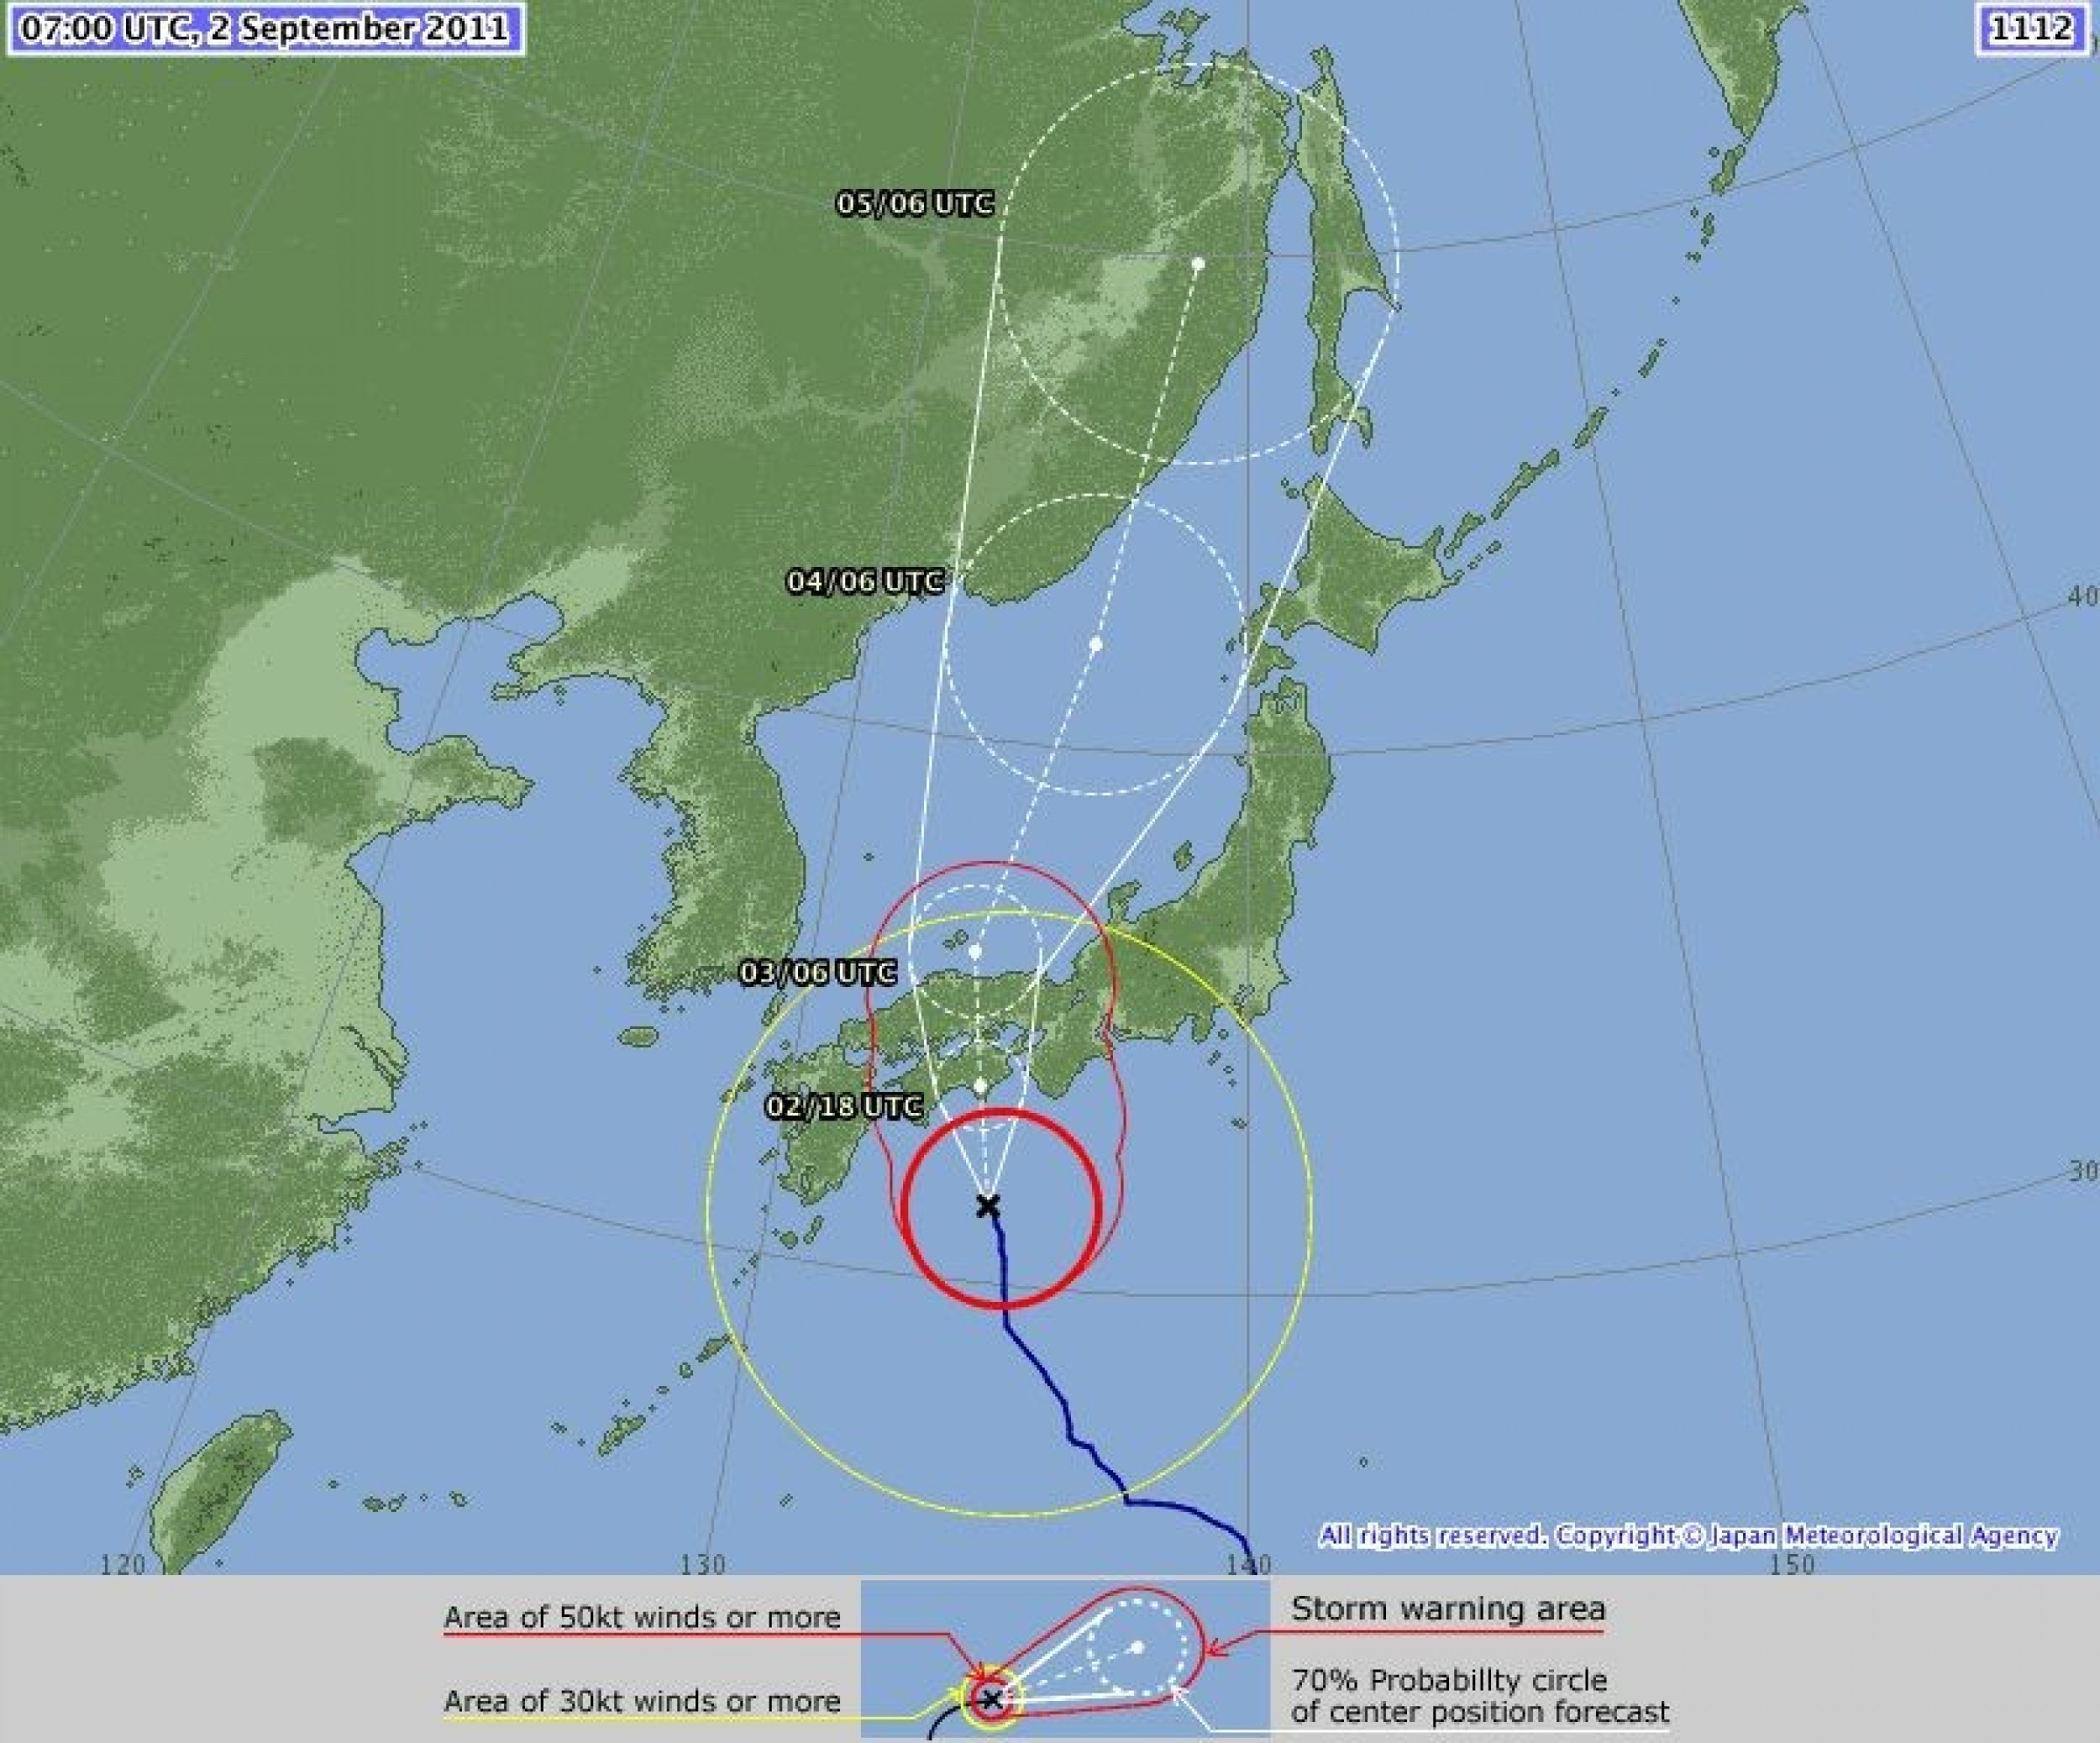 Typhoon Talas Posing Major Threat to Japan with Heavy Rain and Landslides.